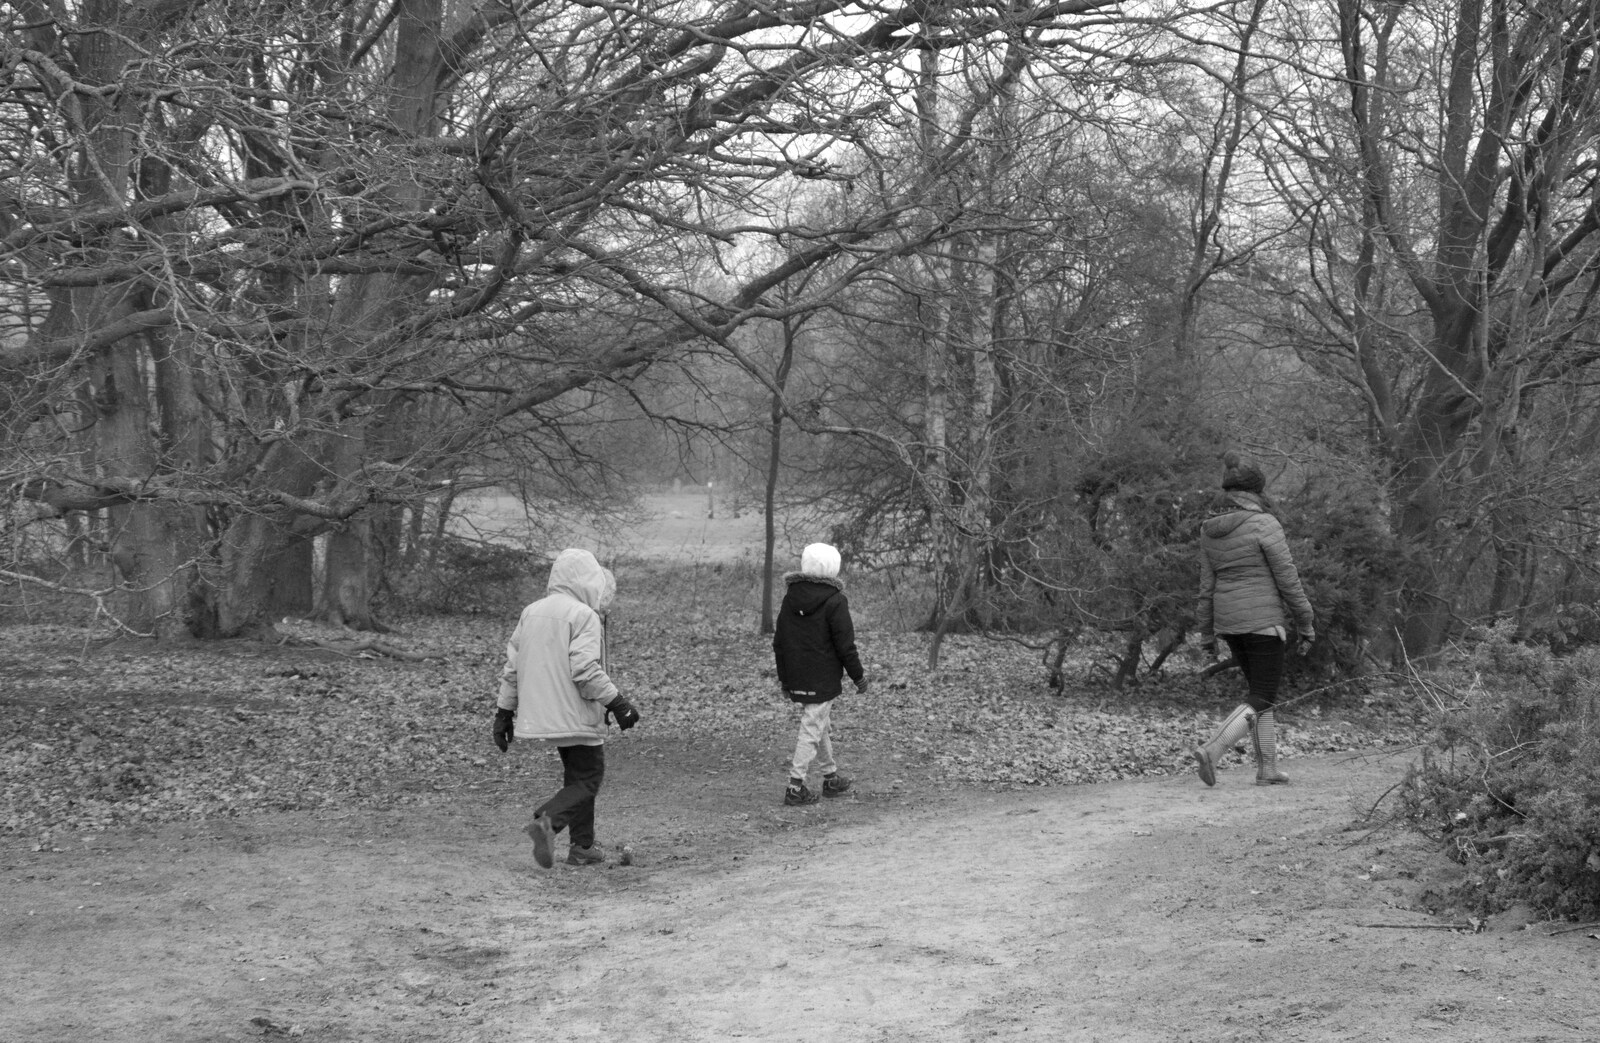 Roaming in black and white from New Year's Day on the Ling, Wortham, Suffolk - 1st January 2020